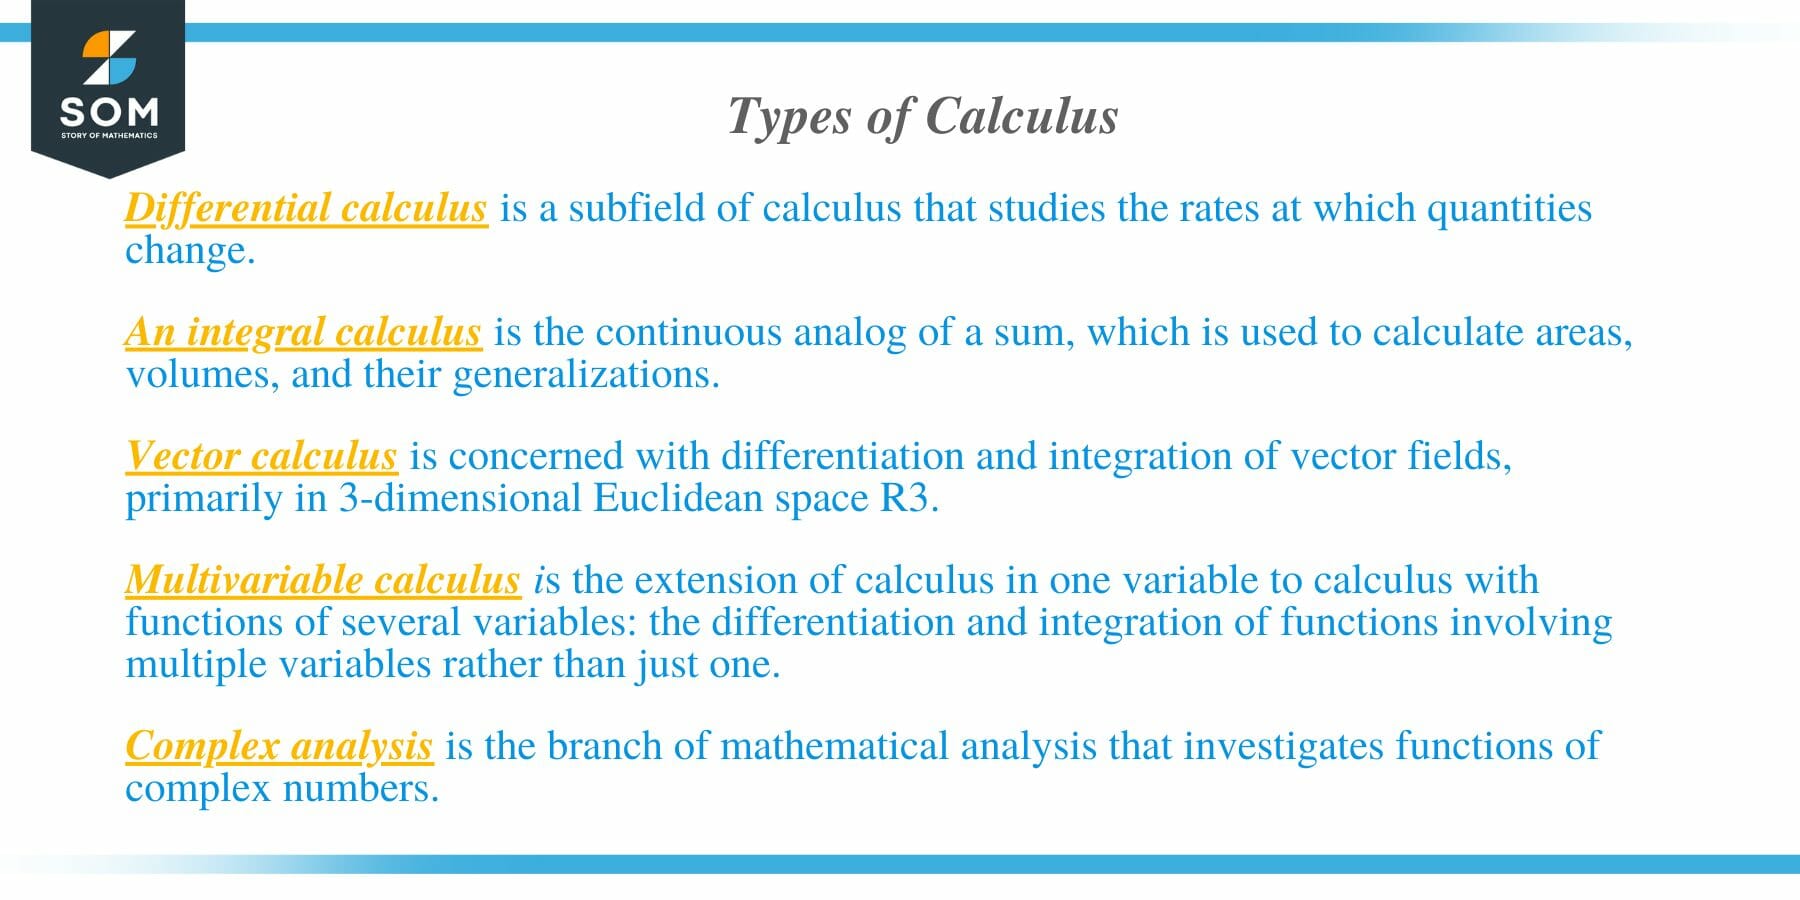 Types of Calculus